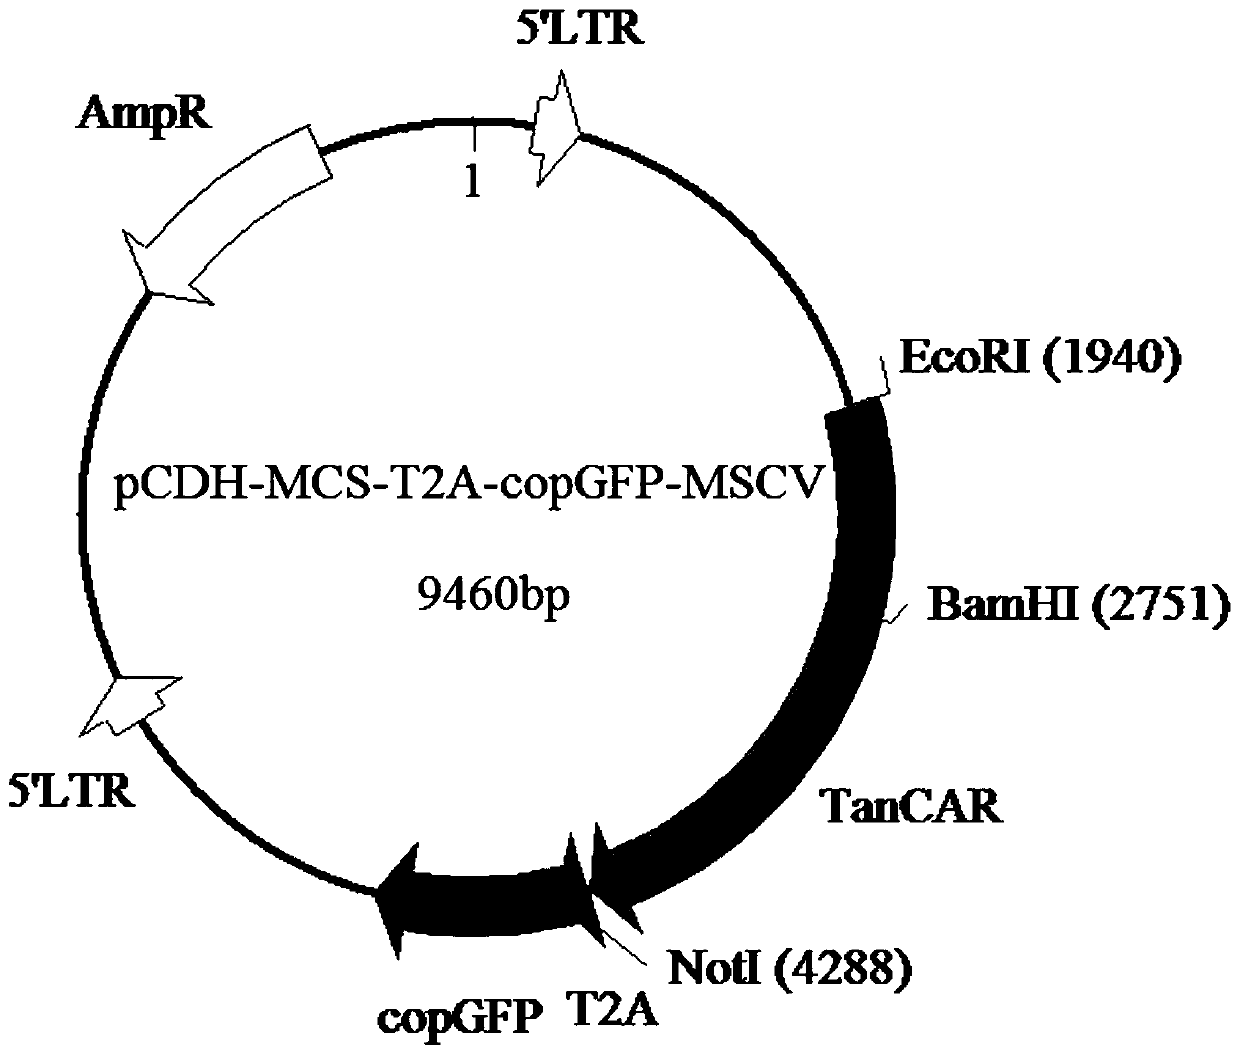 A bispecific chimeric antigen receptor gene targeting MLL leukemia and its application